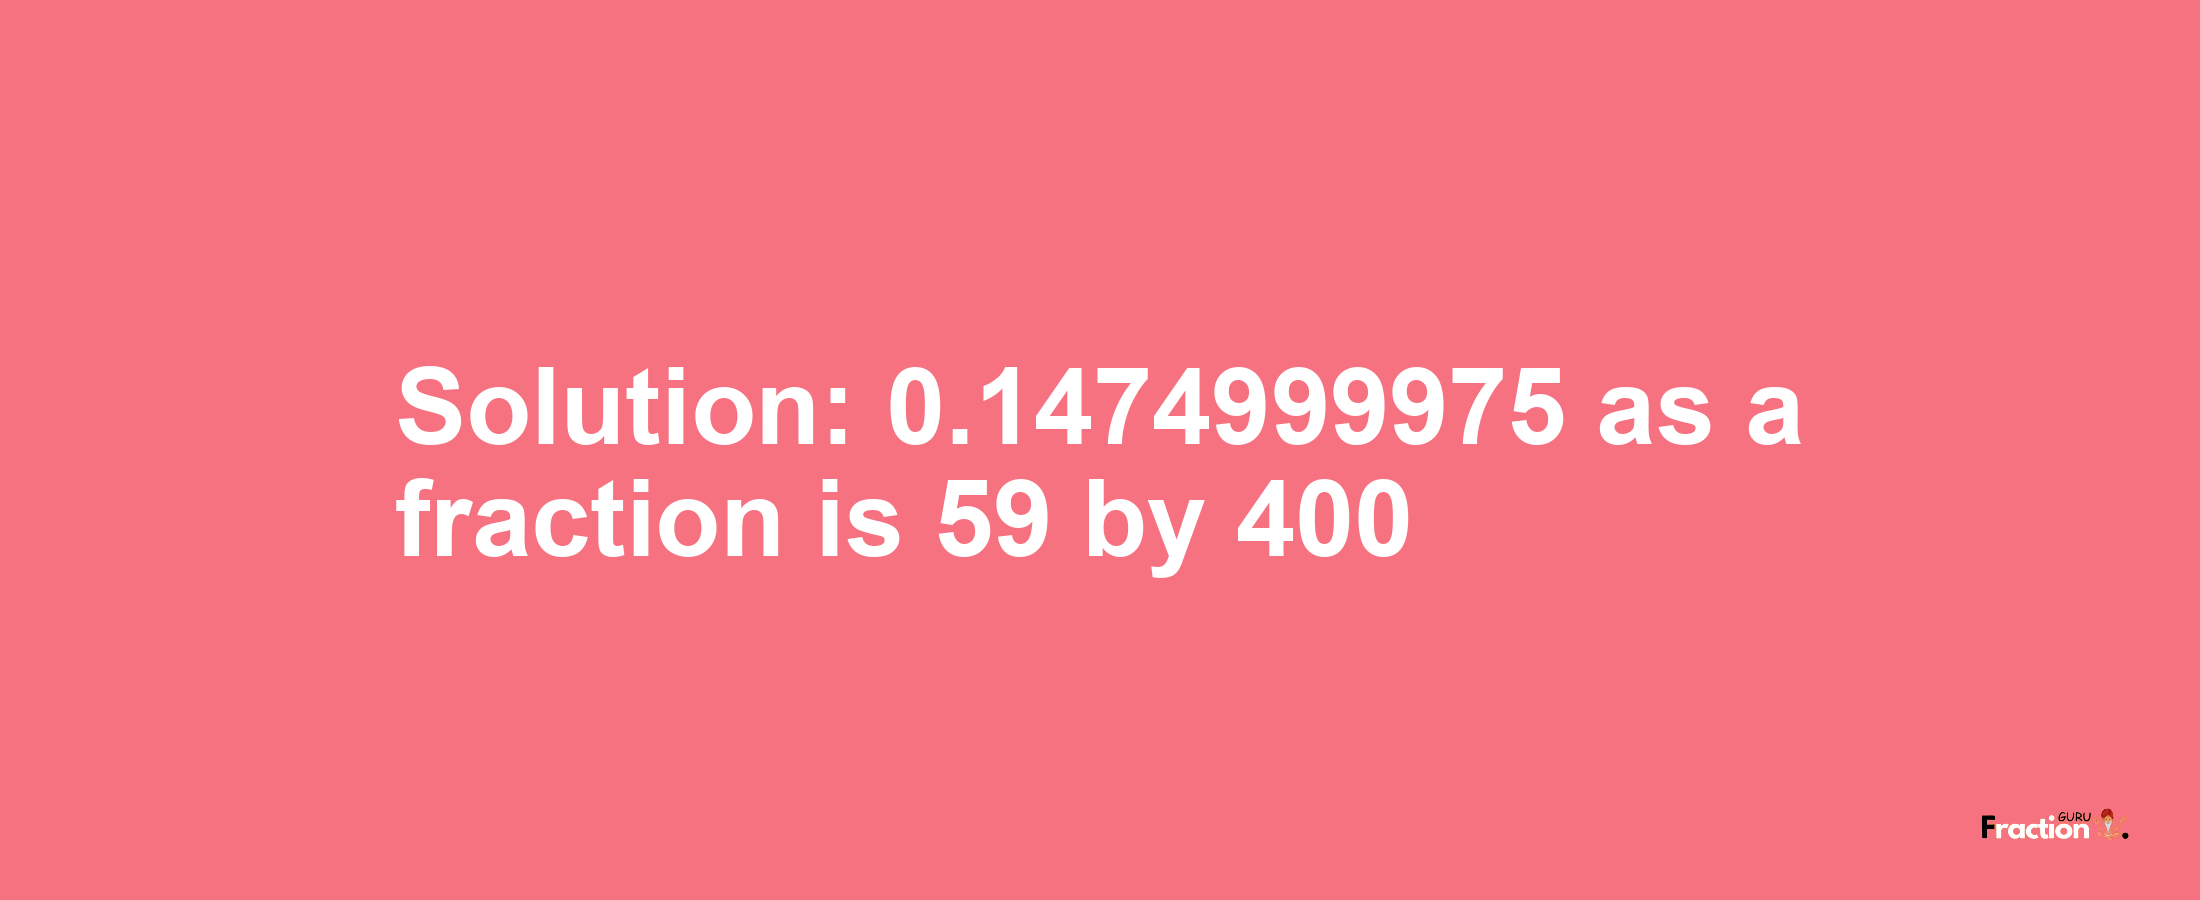 Solution:0.1474999975 as a fraction is 59/400